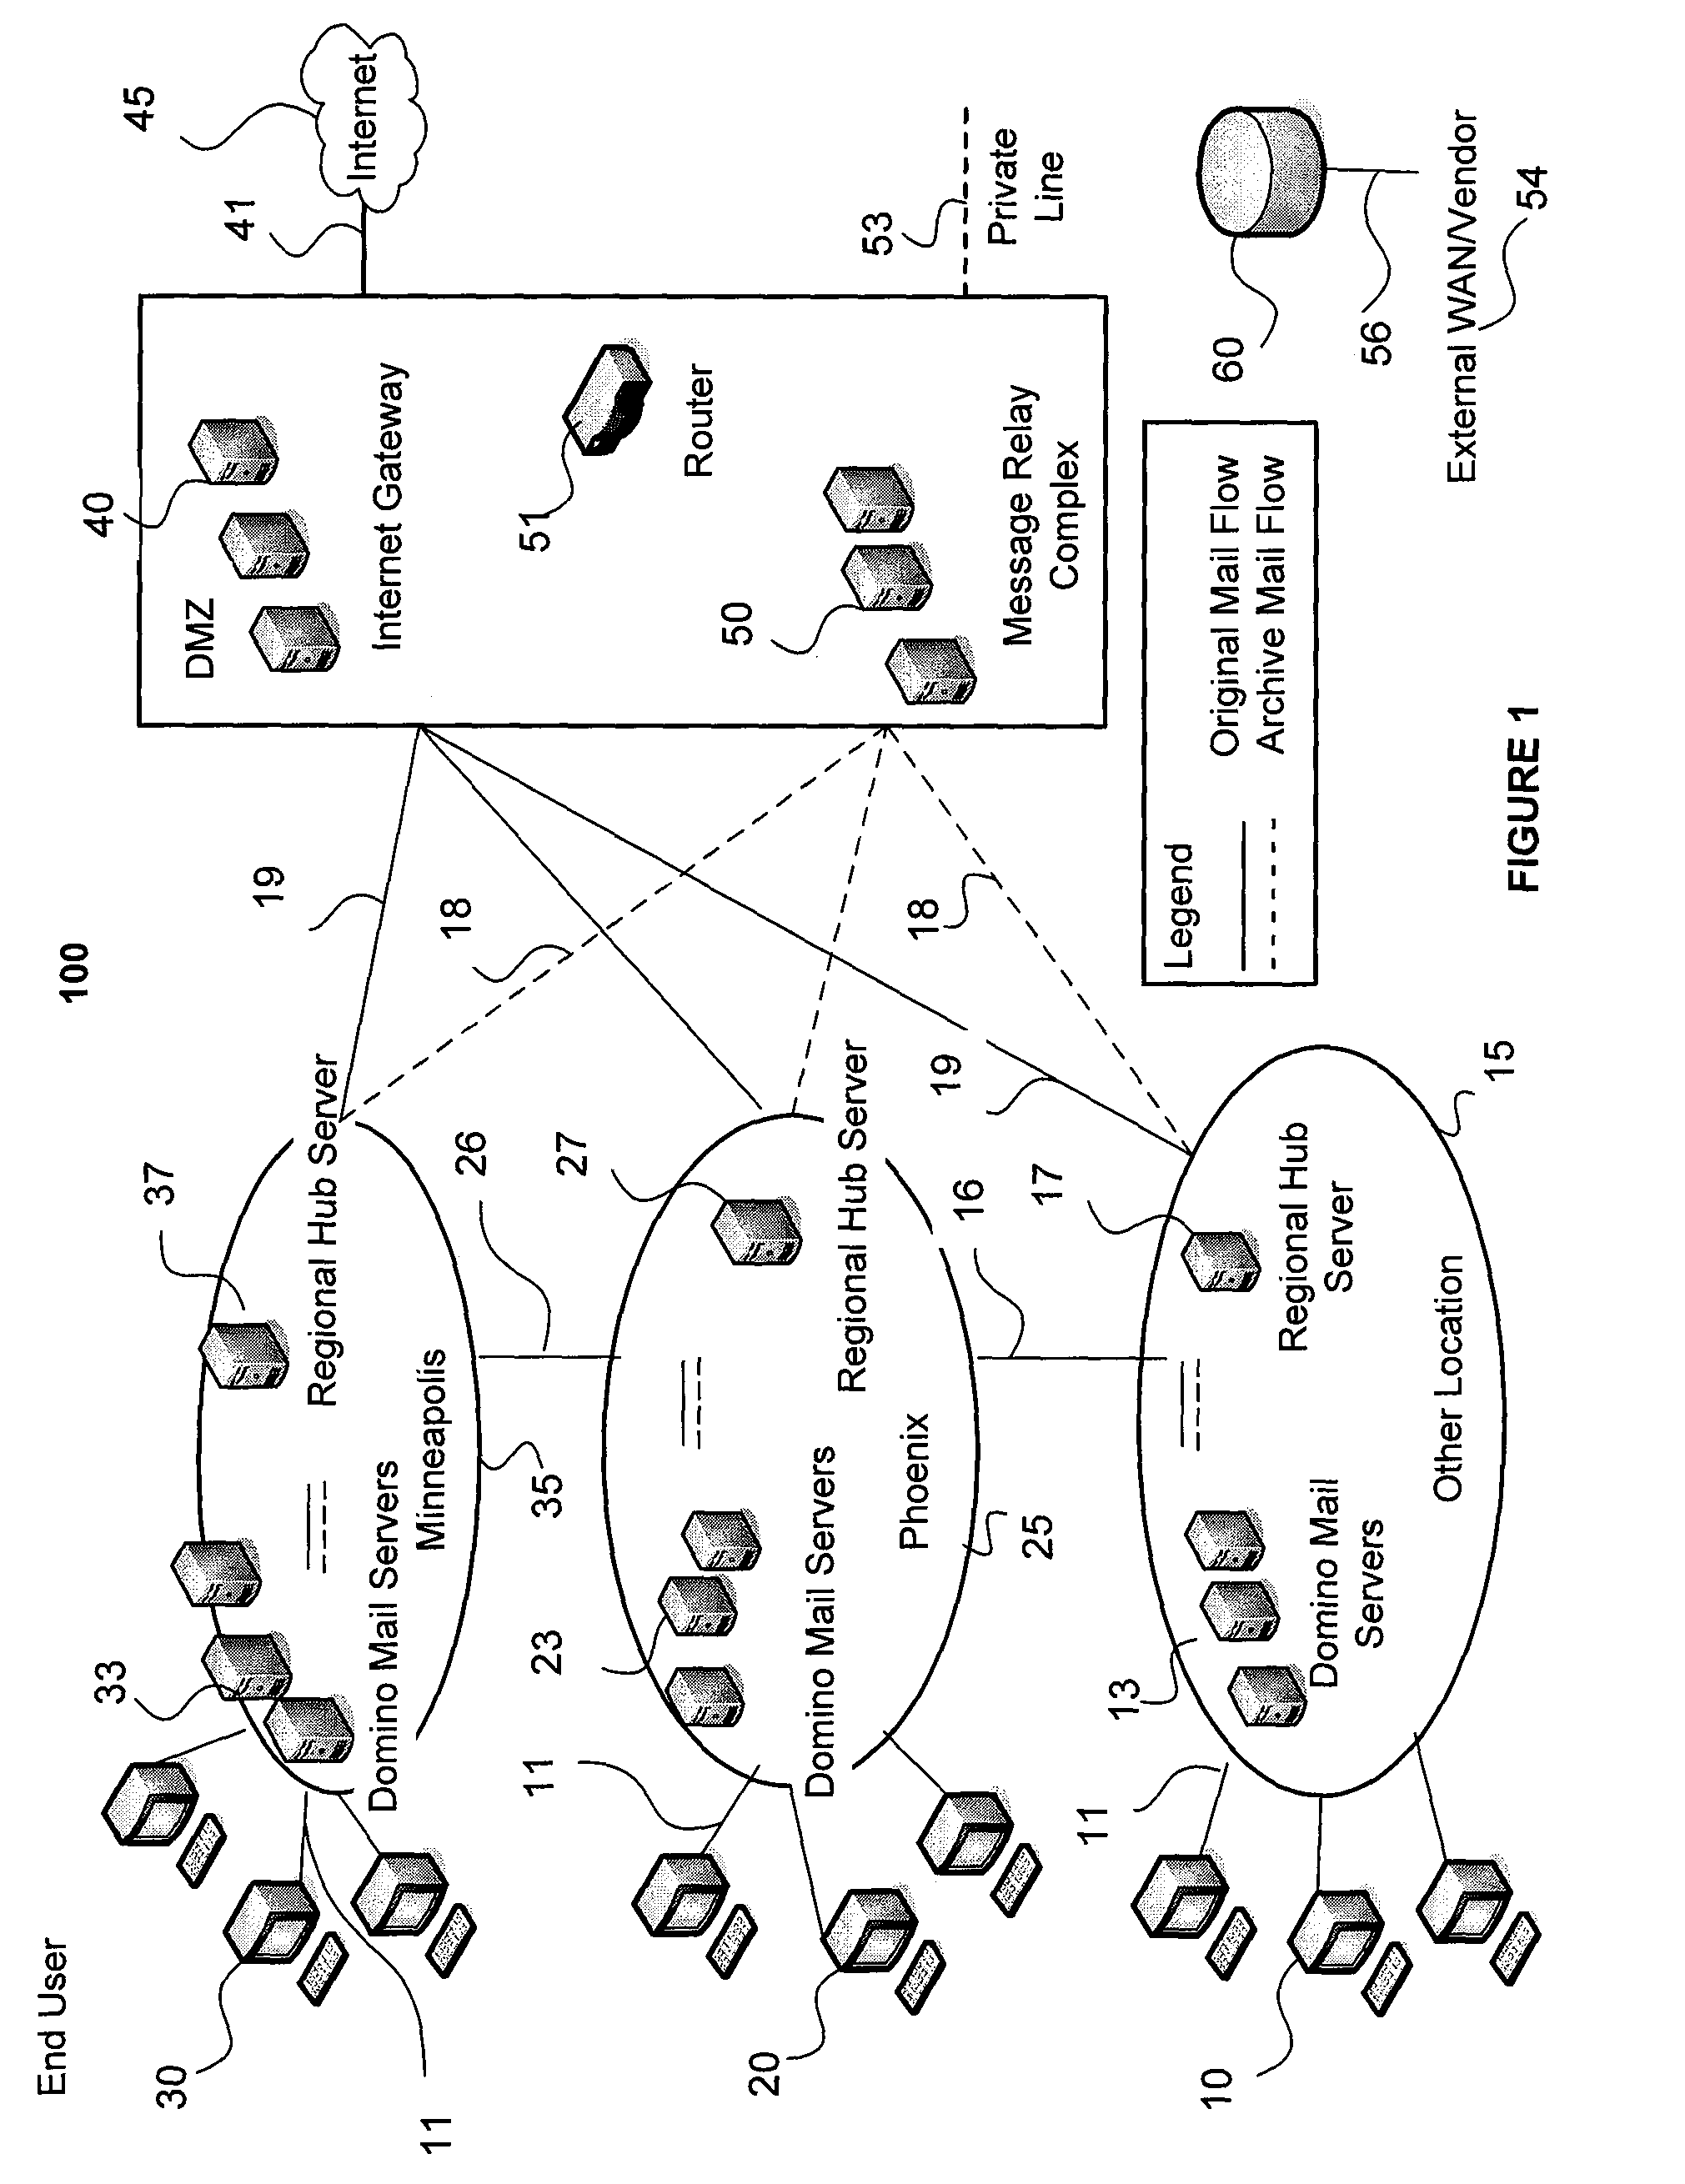 Method and system for electronic archival and retrieval of electronic communications